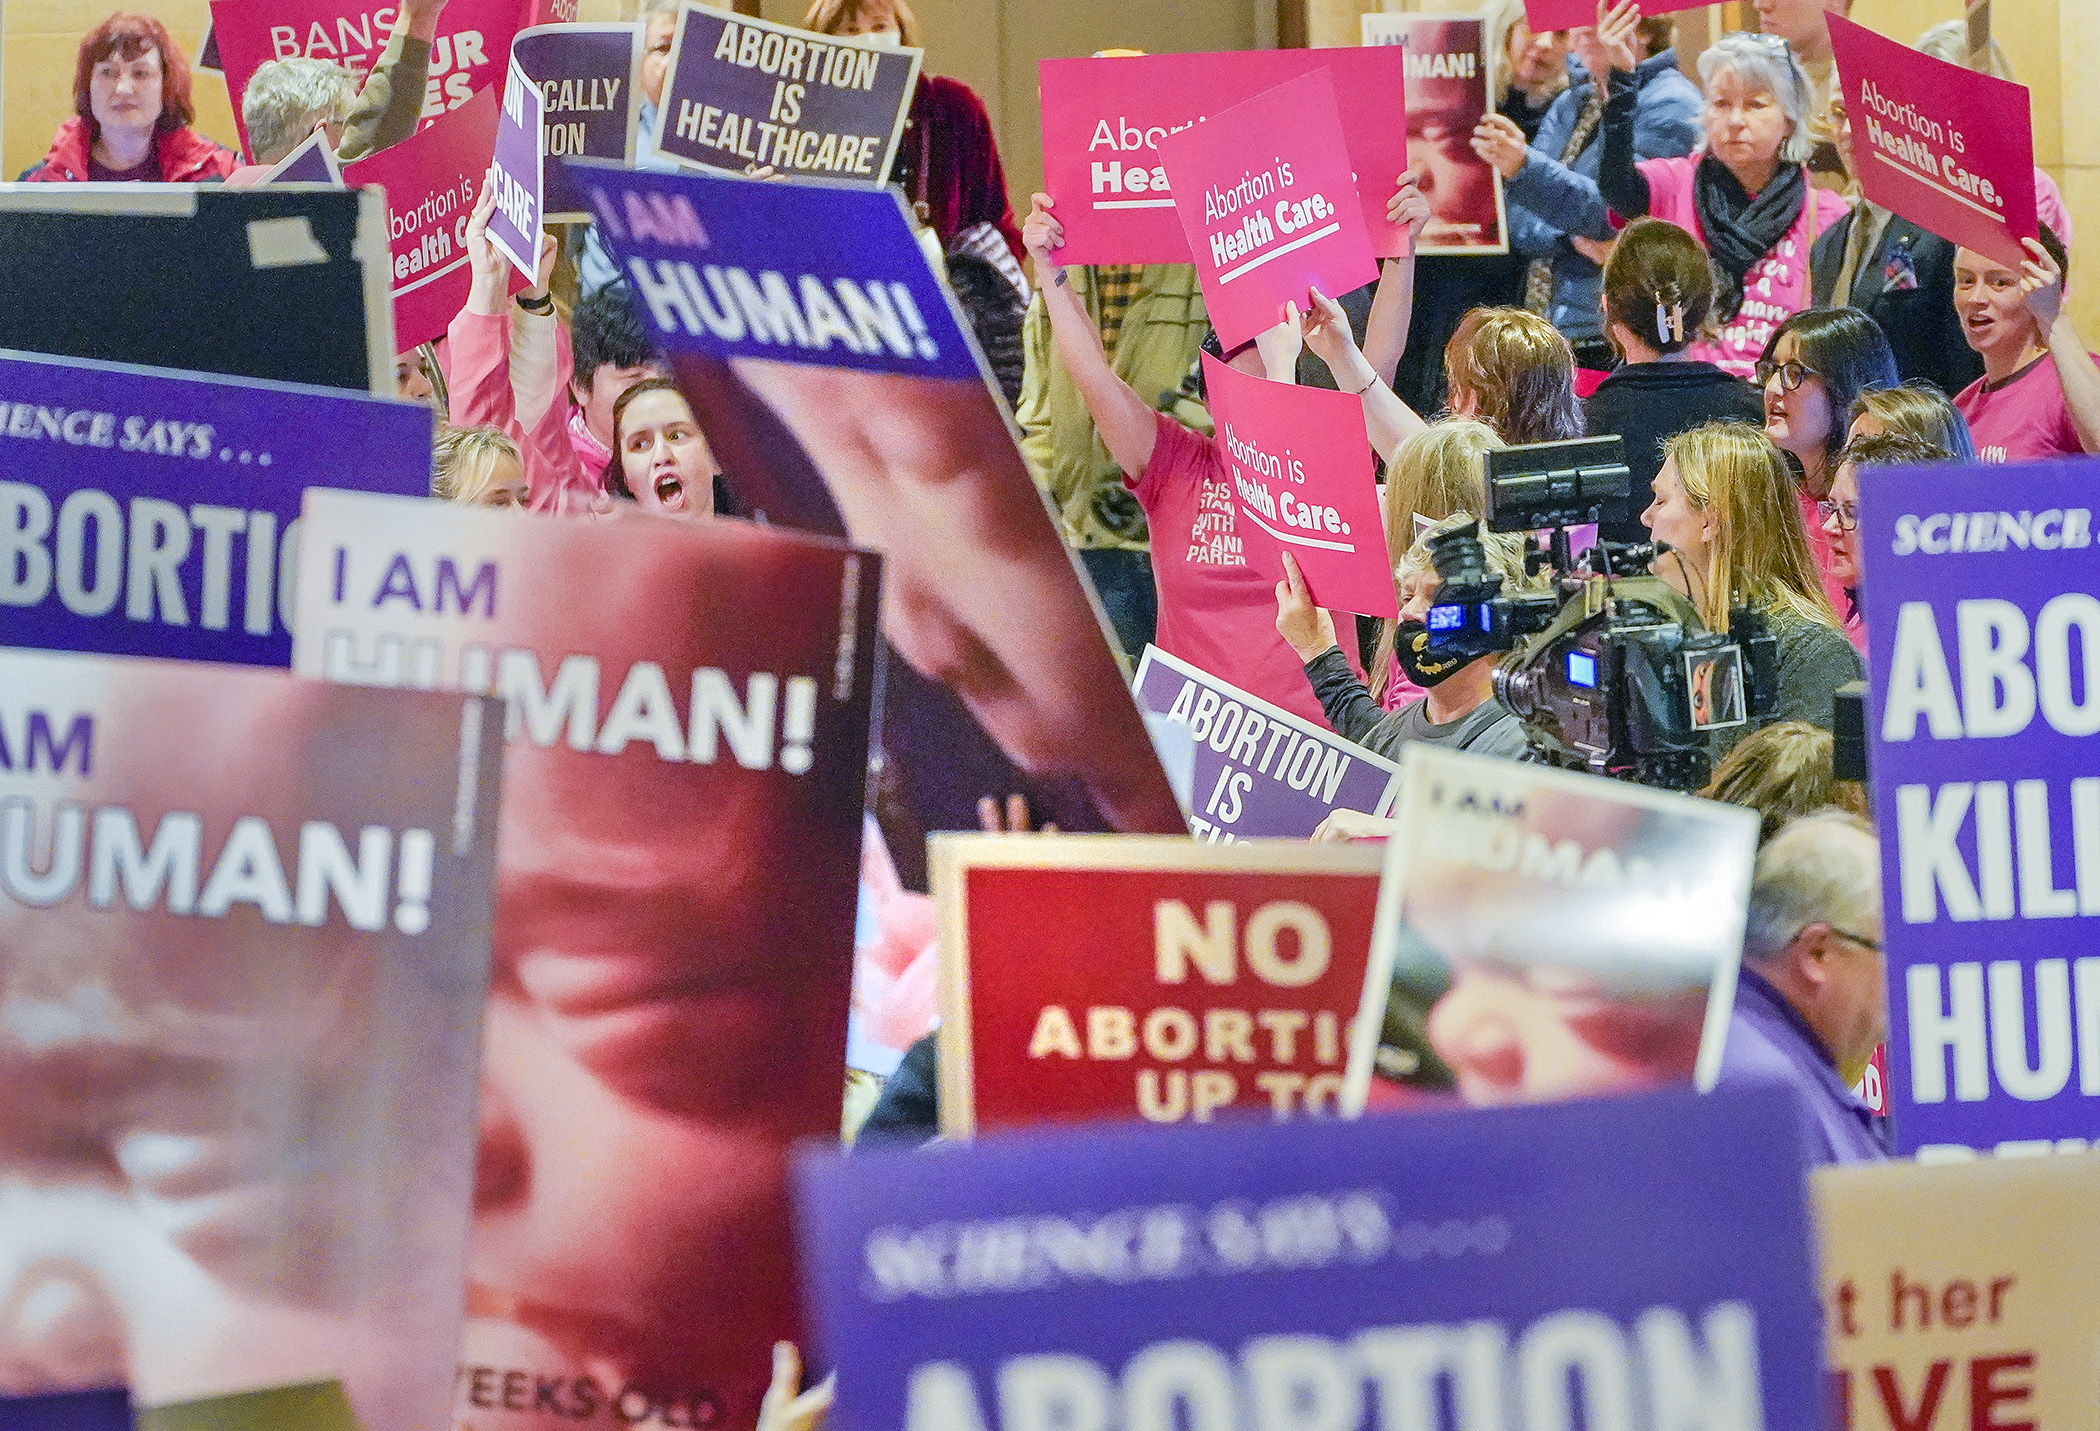 Supporters of reproductive freedom crowded next to abortion opponents in front of the House Chamber Jan. 19 as members inside debated HF1, legislation that would codify the right to an abortion in Minnesota. (Photo by Andrew VonBank)